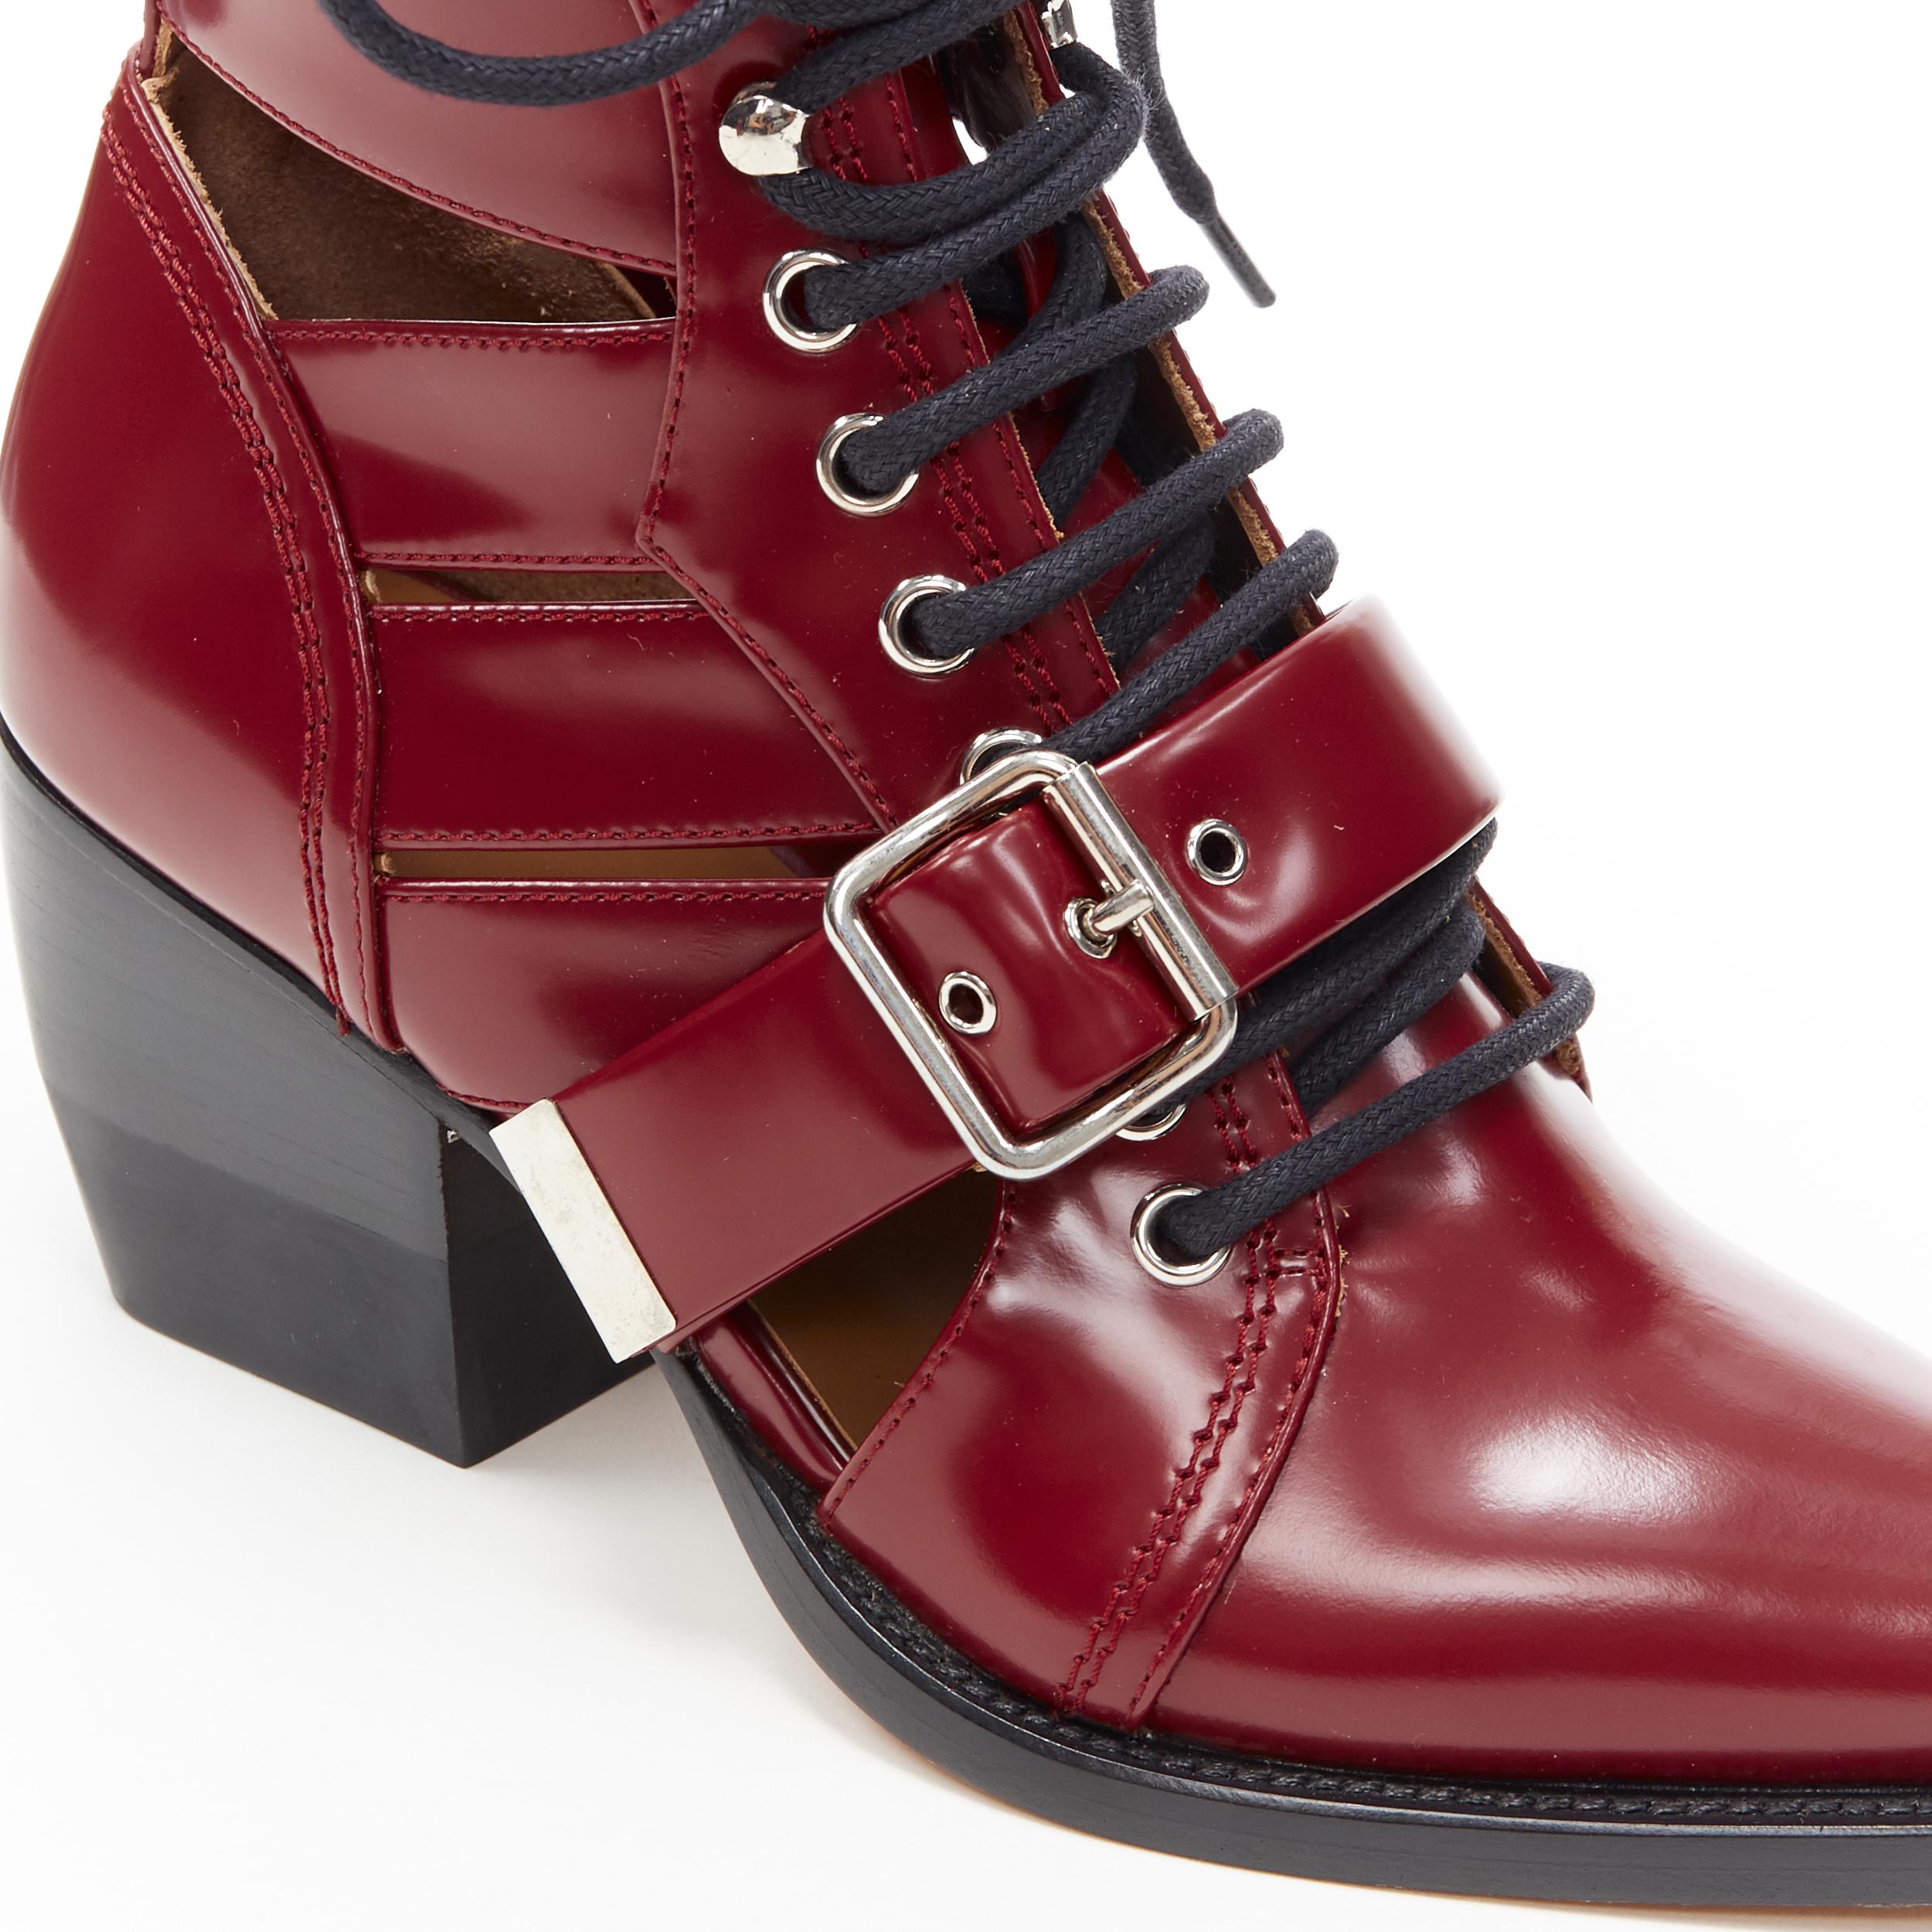 new CHLOE Rylee burgundy red leather cut out buckled pointy ankle boot EU37.5 1